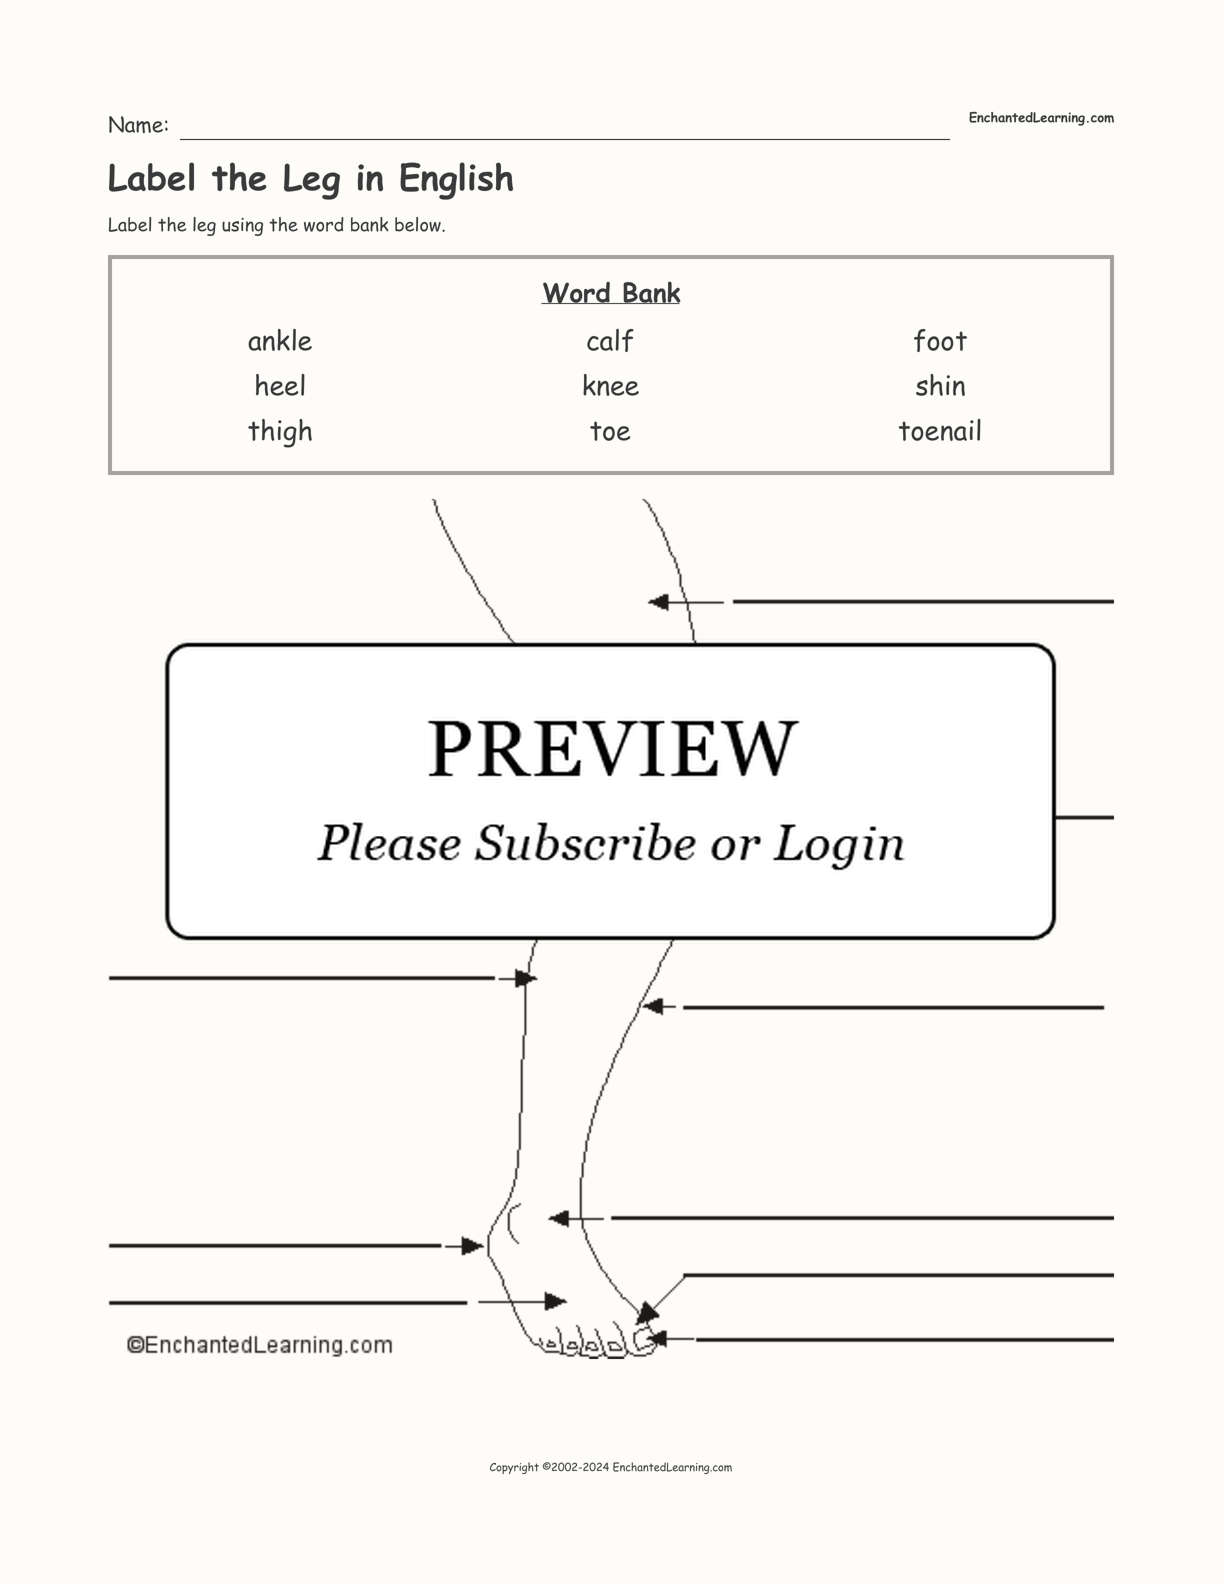 Label the Leg in English interactive worksheet page 1